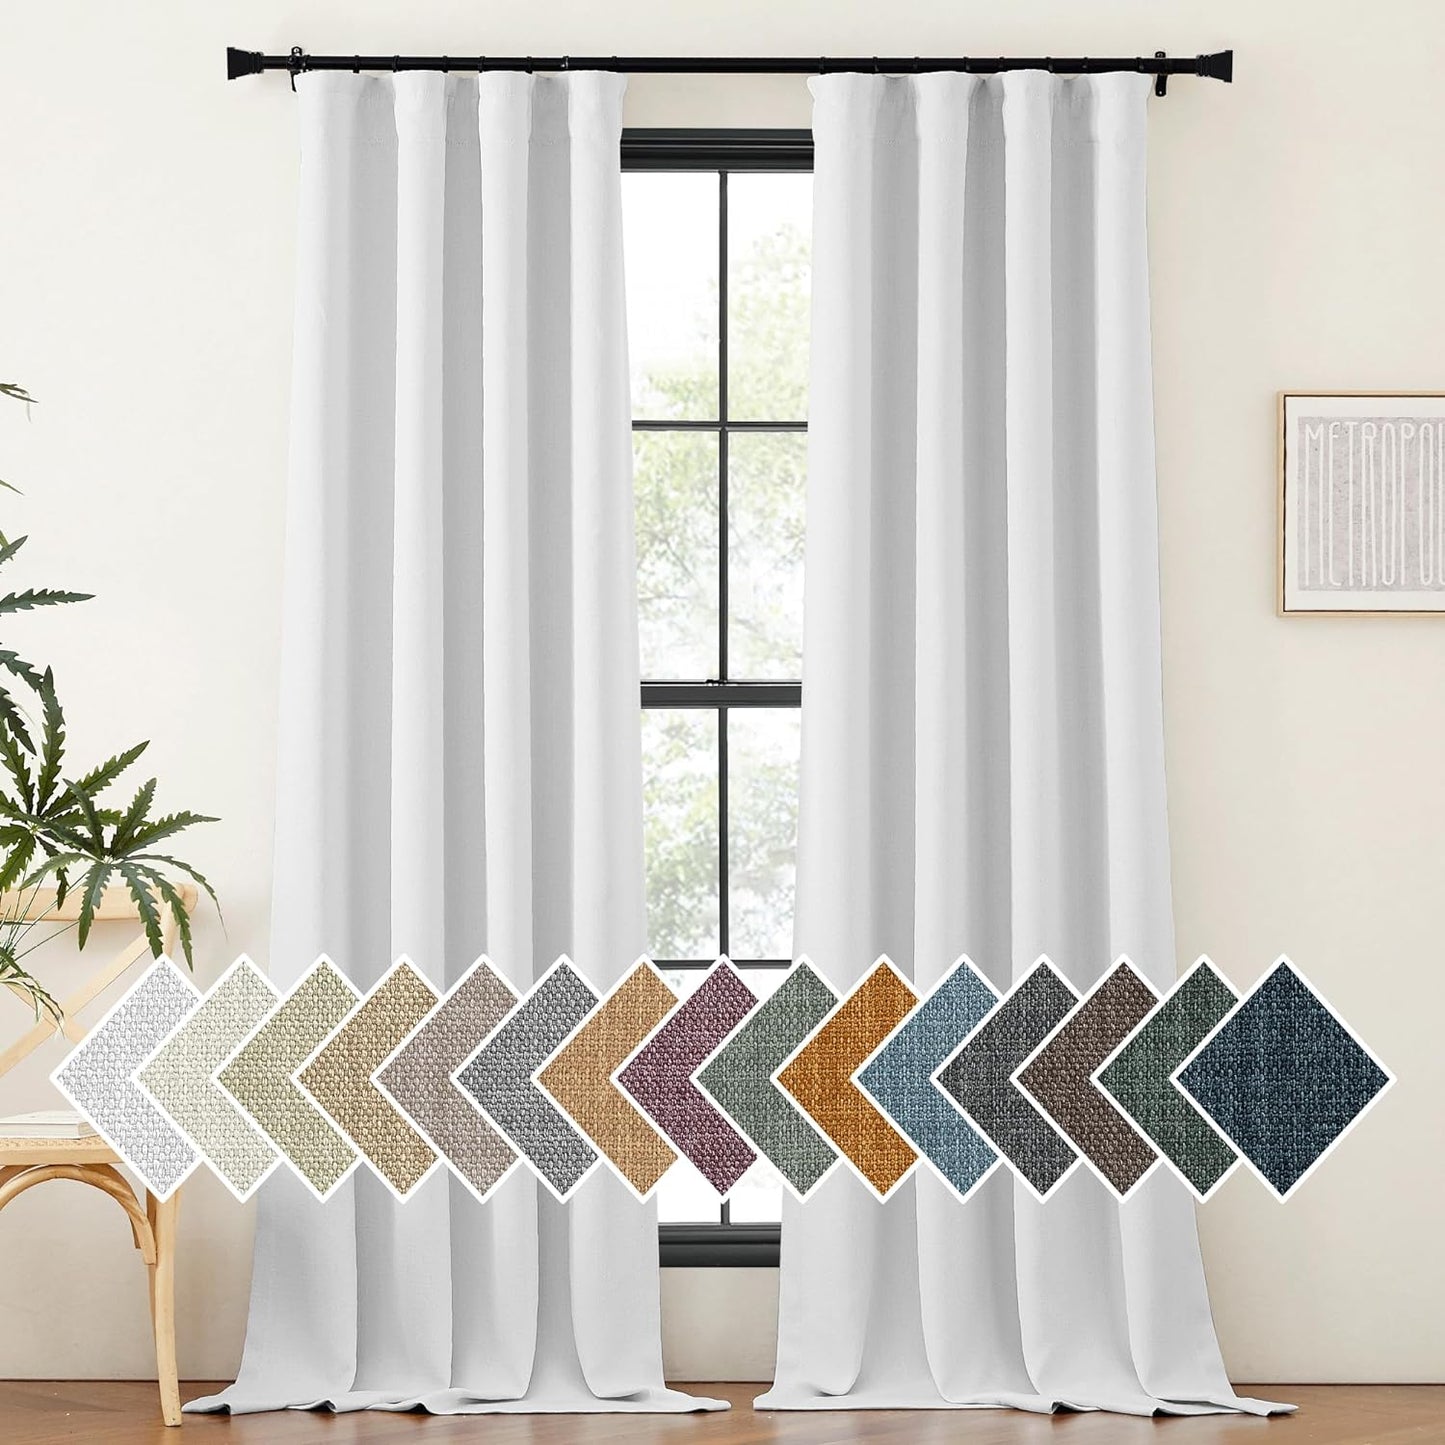 NICETOWN Faux Linen Room Darkening Curtains & Drapes for Living Room, Dual Rod Pockets & Hook Belt Heat/Light Blocking Window Treatments Thermal Drapes for Bedroom, Angora, W52 X L84, 2 Panels  NICETOWN Greyish White W52 X L96 